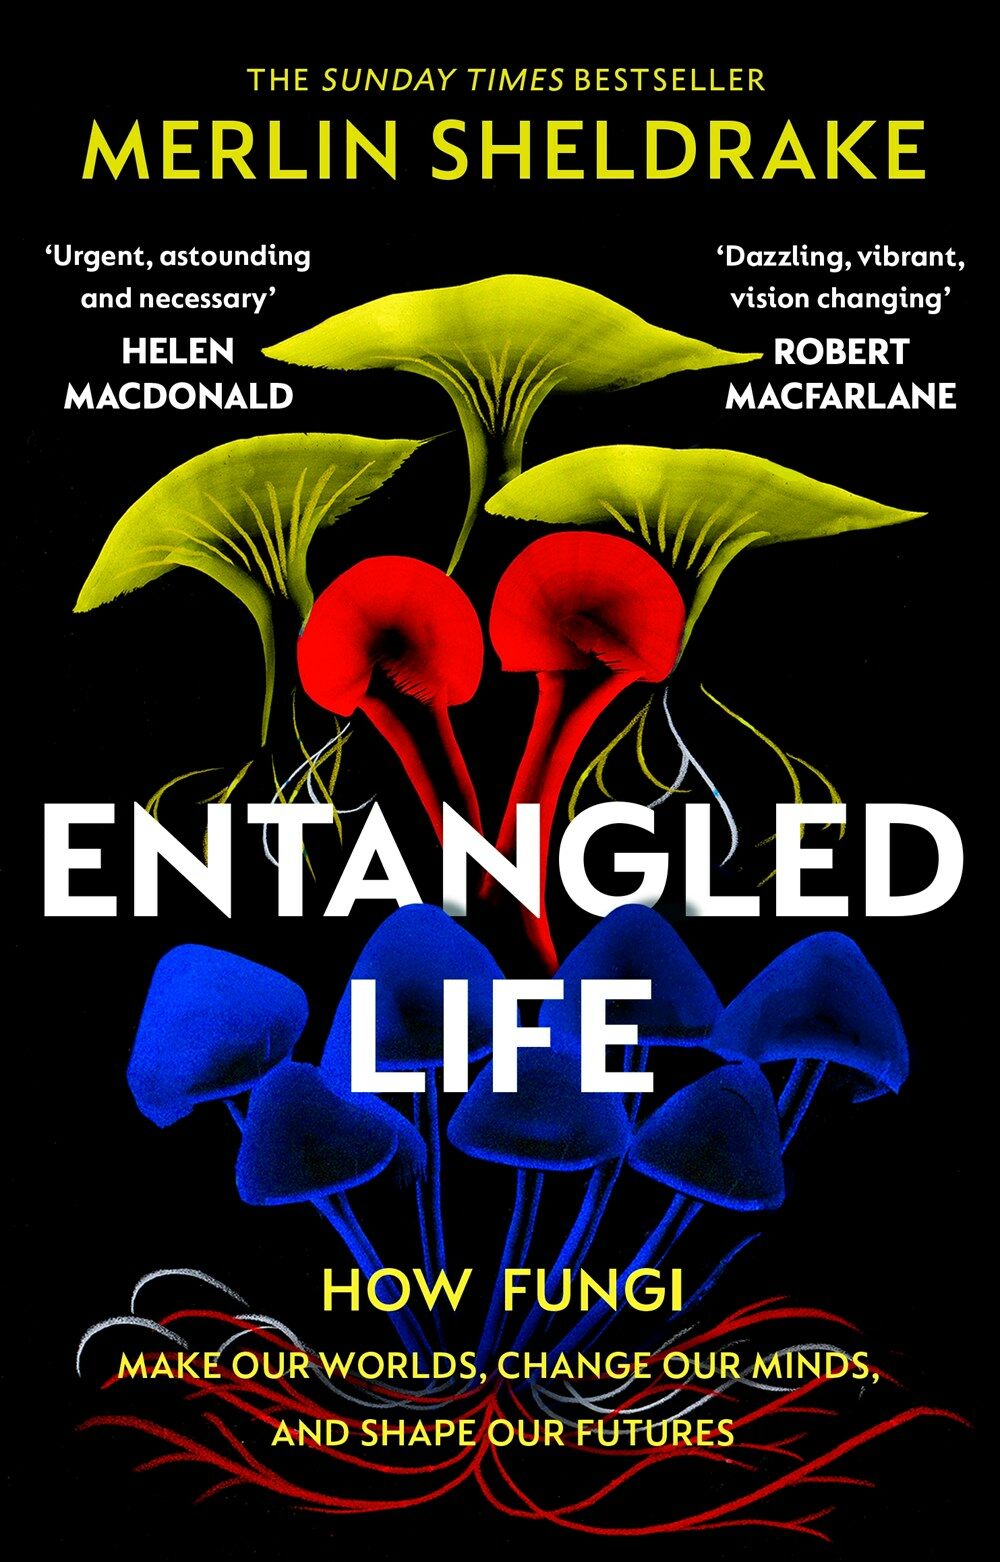 Entangled Life : The phenomenal Sunday Times bestseller exploring how fungi make our worlds, change our minds and shape our futures (Paperback)